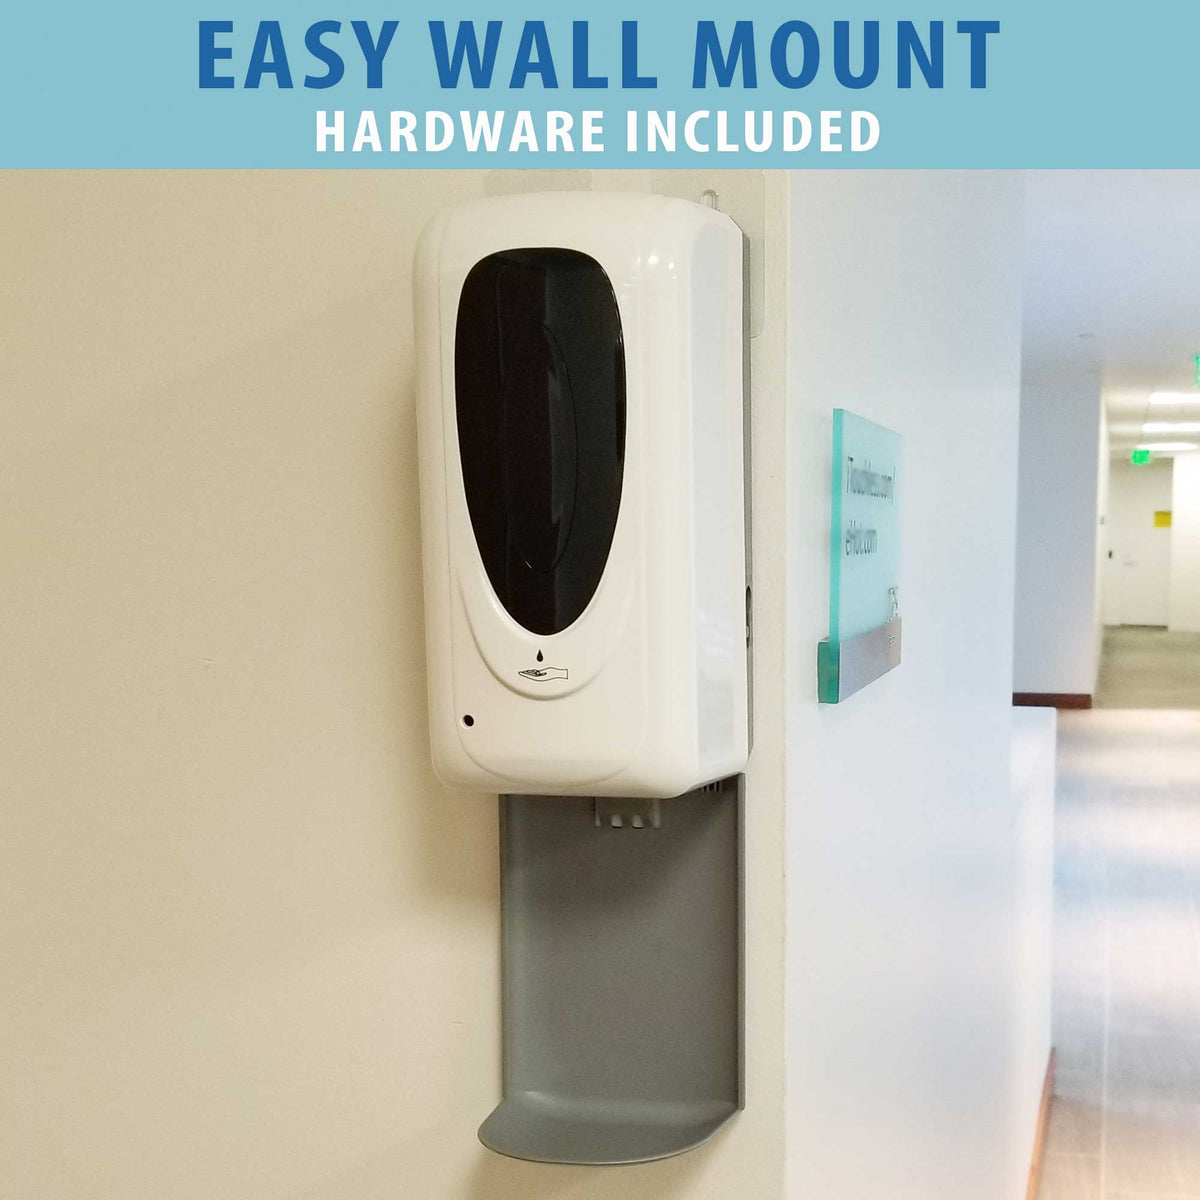 Easy Wall Mount Hardware Included